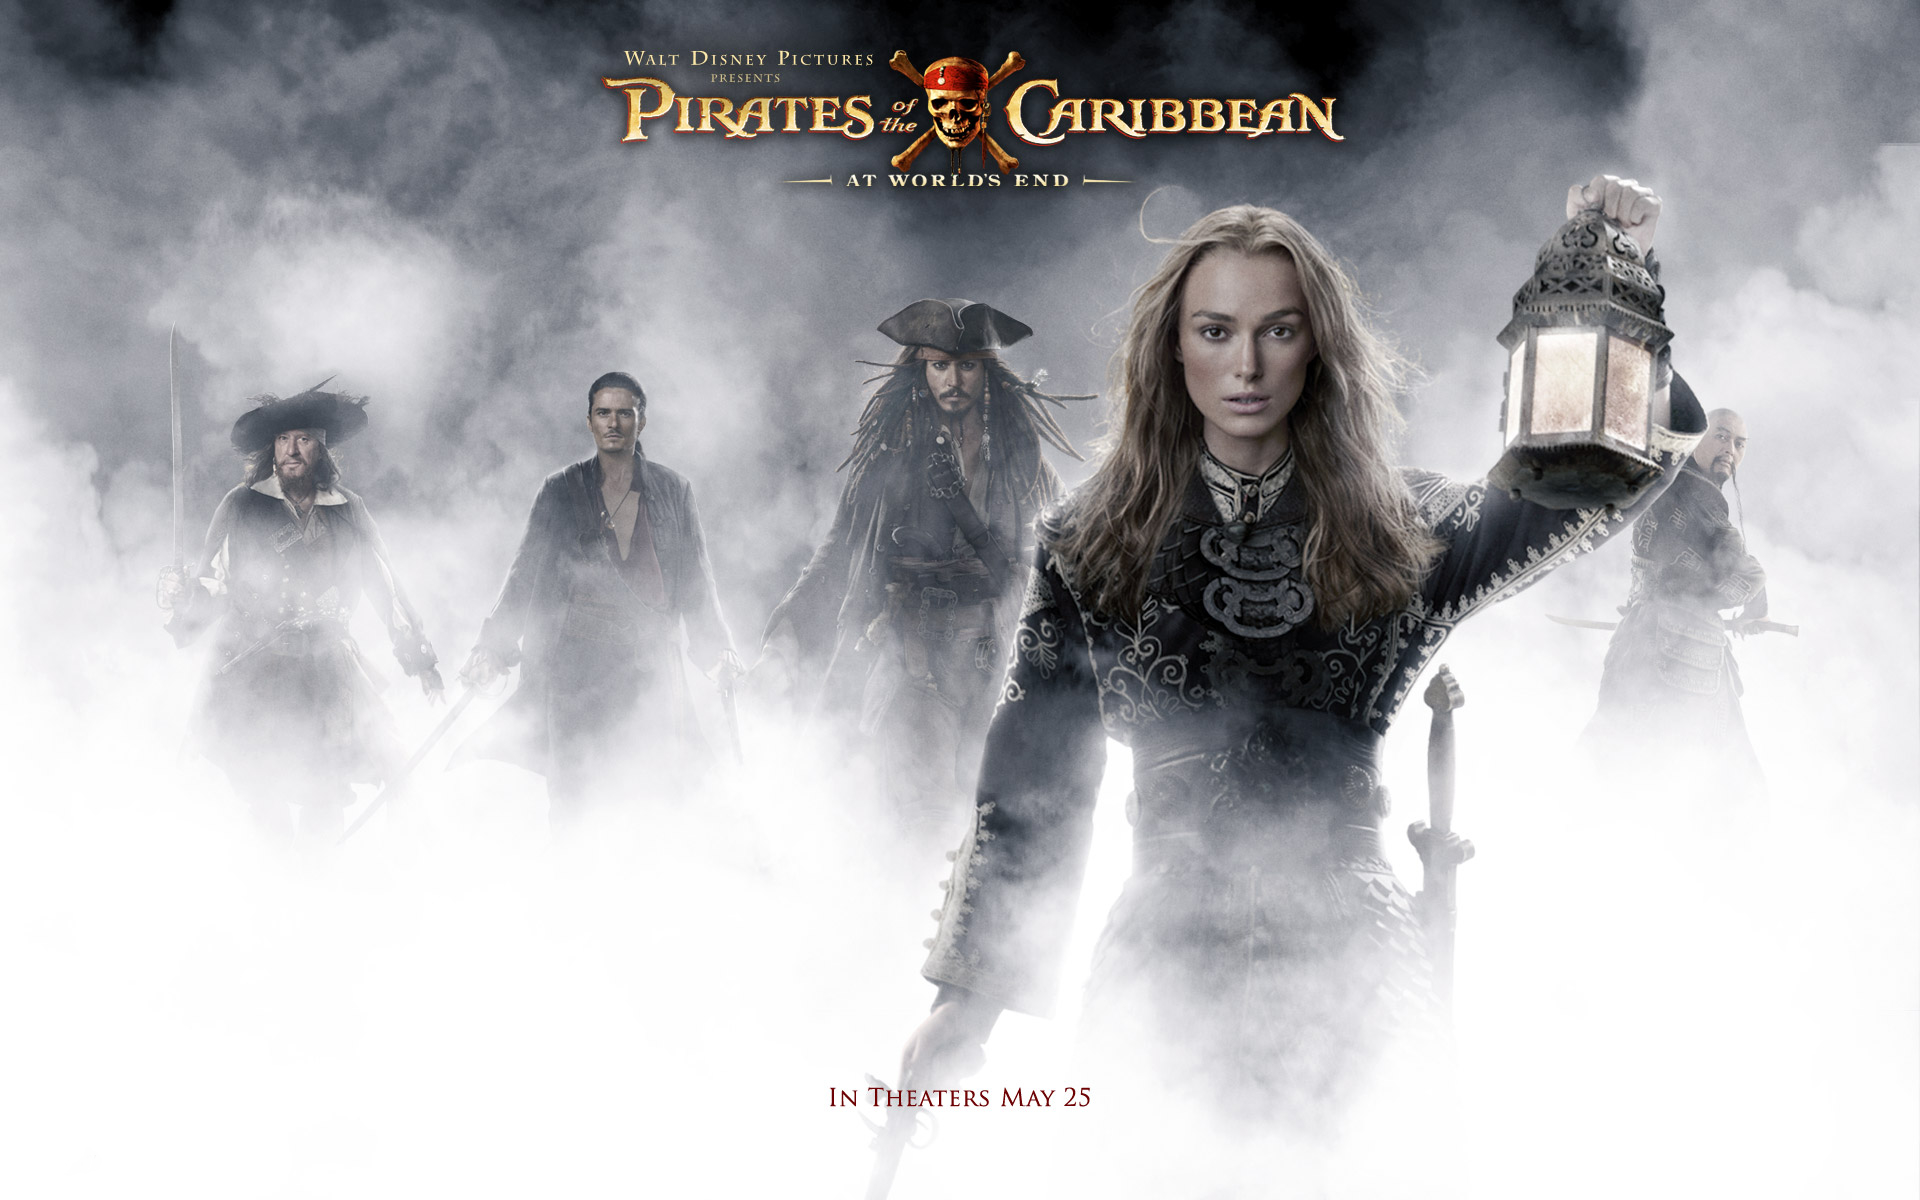 Download mobile wallpaper Pirates Of The Caribbean: At World's End, Captain Sao Feng, Chow Yun Fat, Will Turner, Elizabeth Swann, Orlando Bloom, Geoffrey Rush, Hector Barbossa, Keira Knightley, Johnny Depp, Jack Sparrow, Pirates Of The Caribbean, Movie for free.